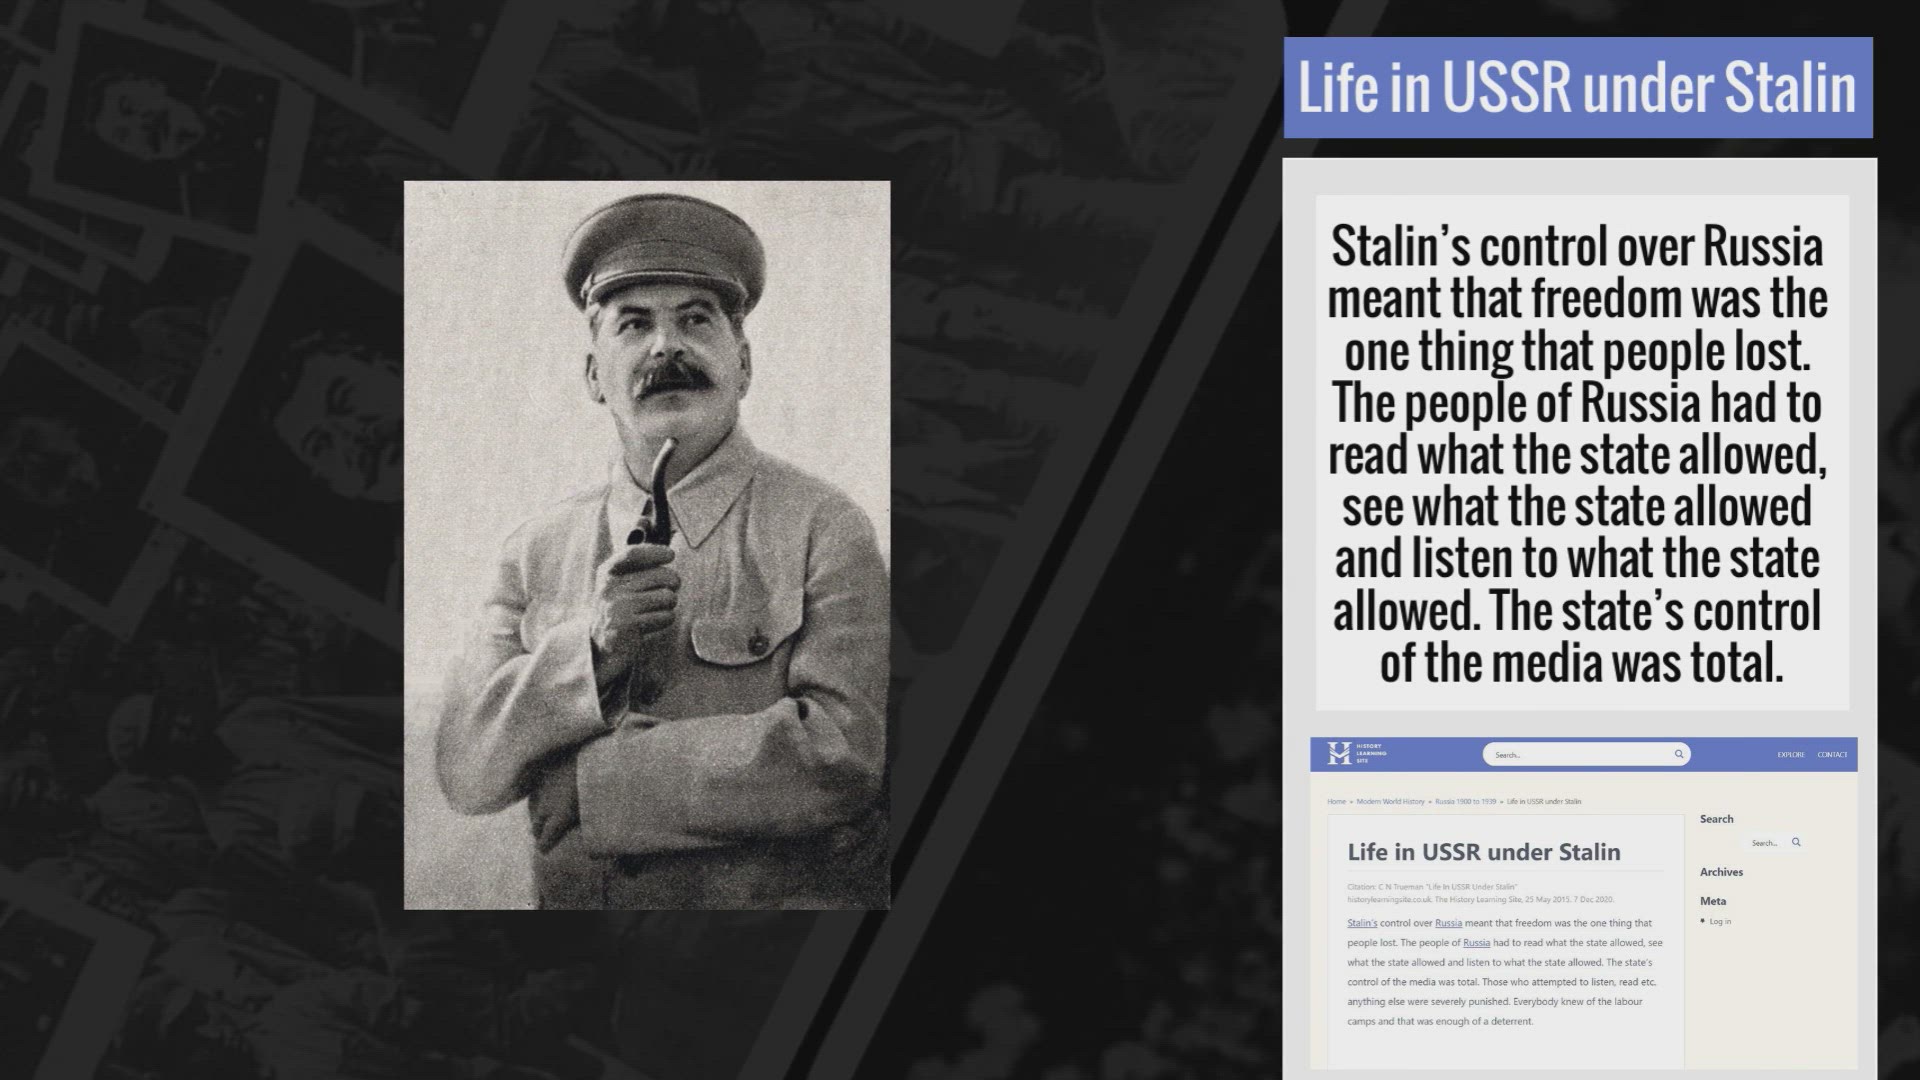 stalin quotes fear